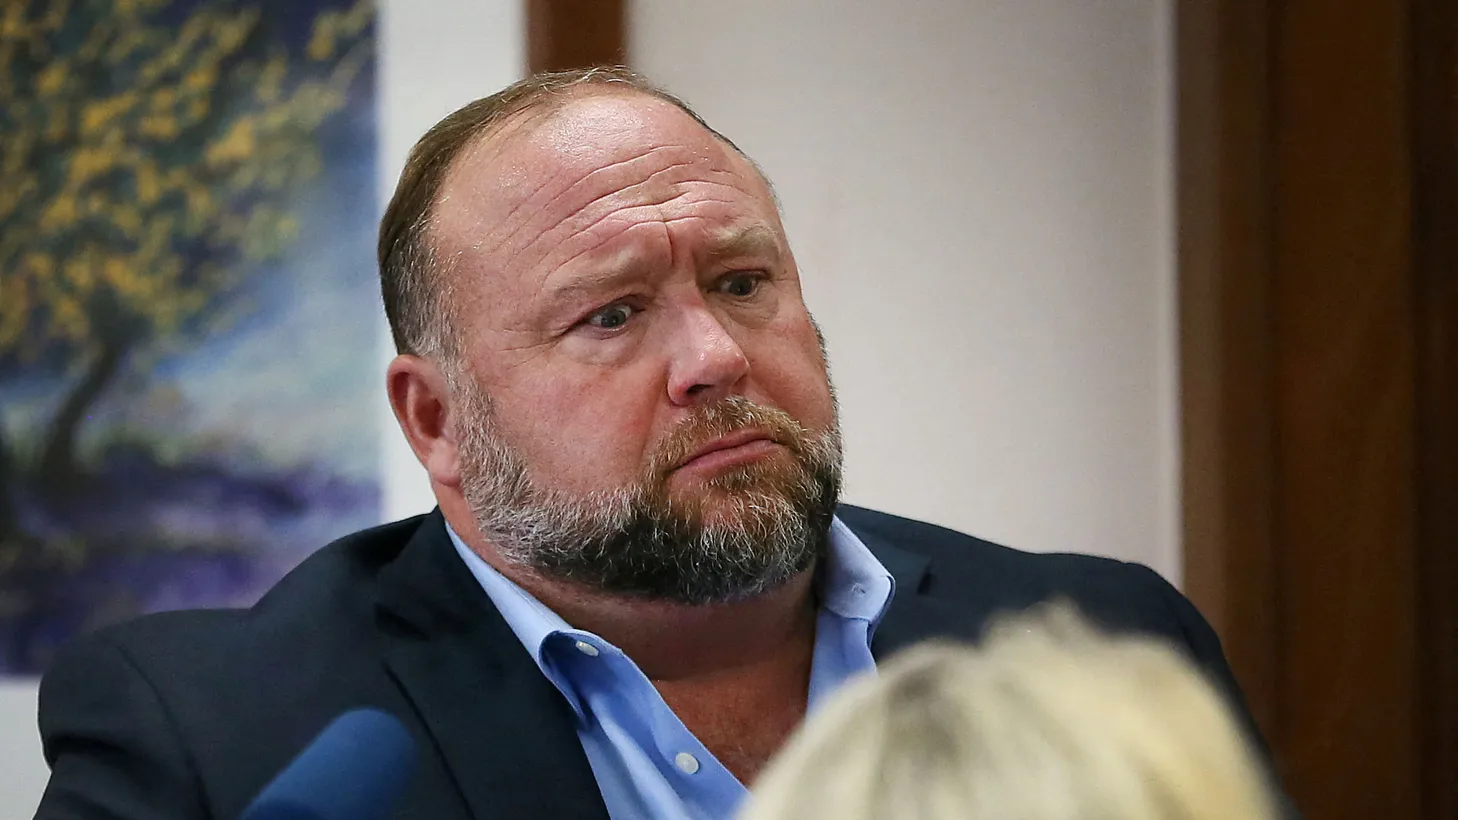 Alex Jones attempts to answer questions about his emails. Mark Bankston, lawyer for Neil Heslin and Scarlett Lewis, asked those questions during a trial at the Travis County Courthouse, Austin, Texas, U.S., August 3, 2022.